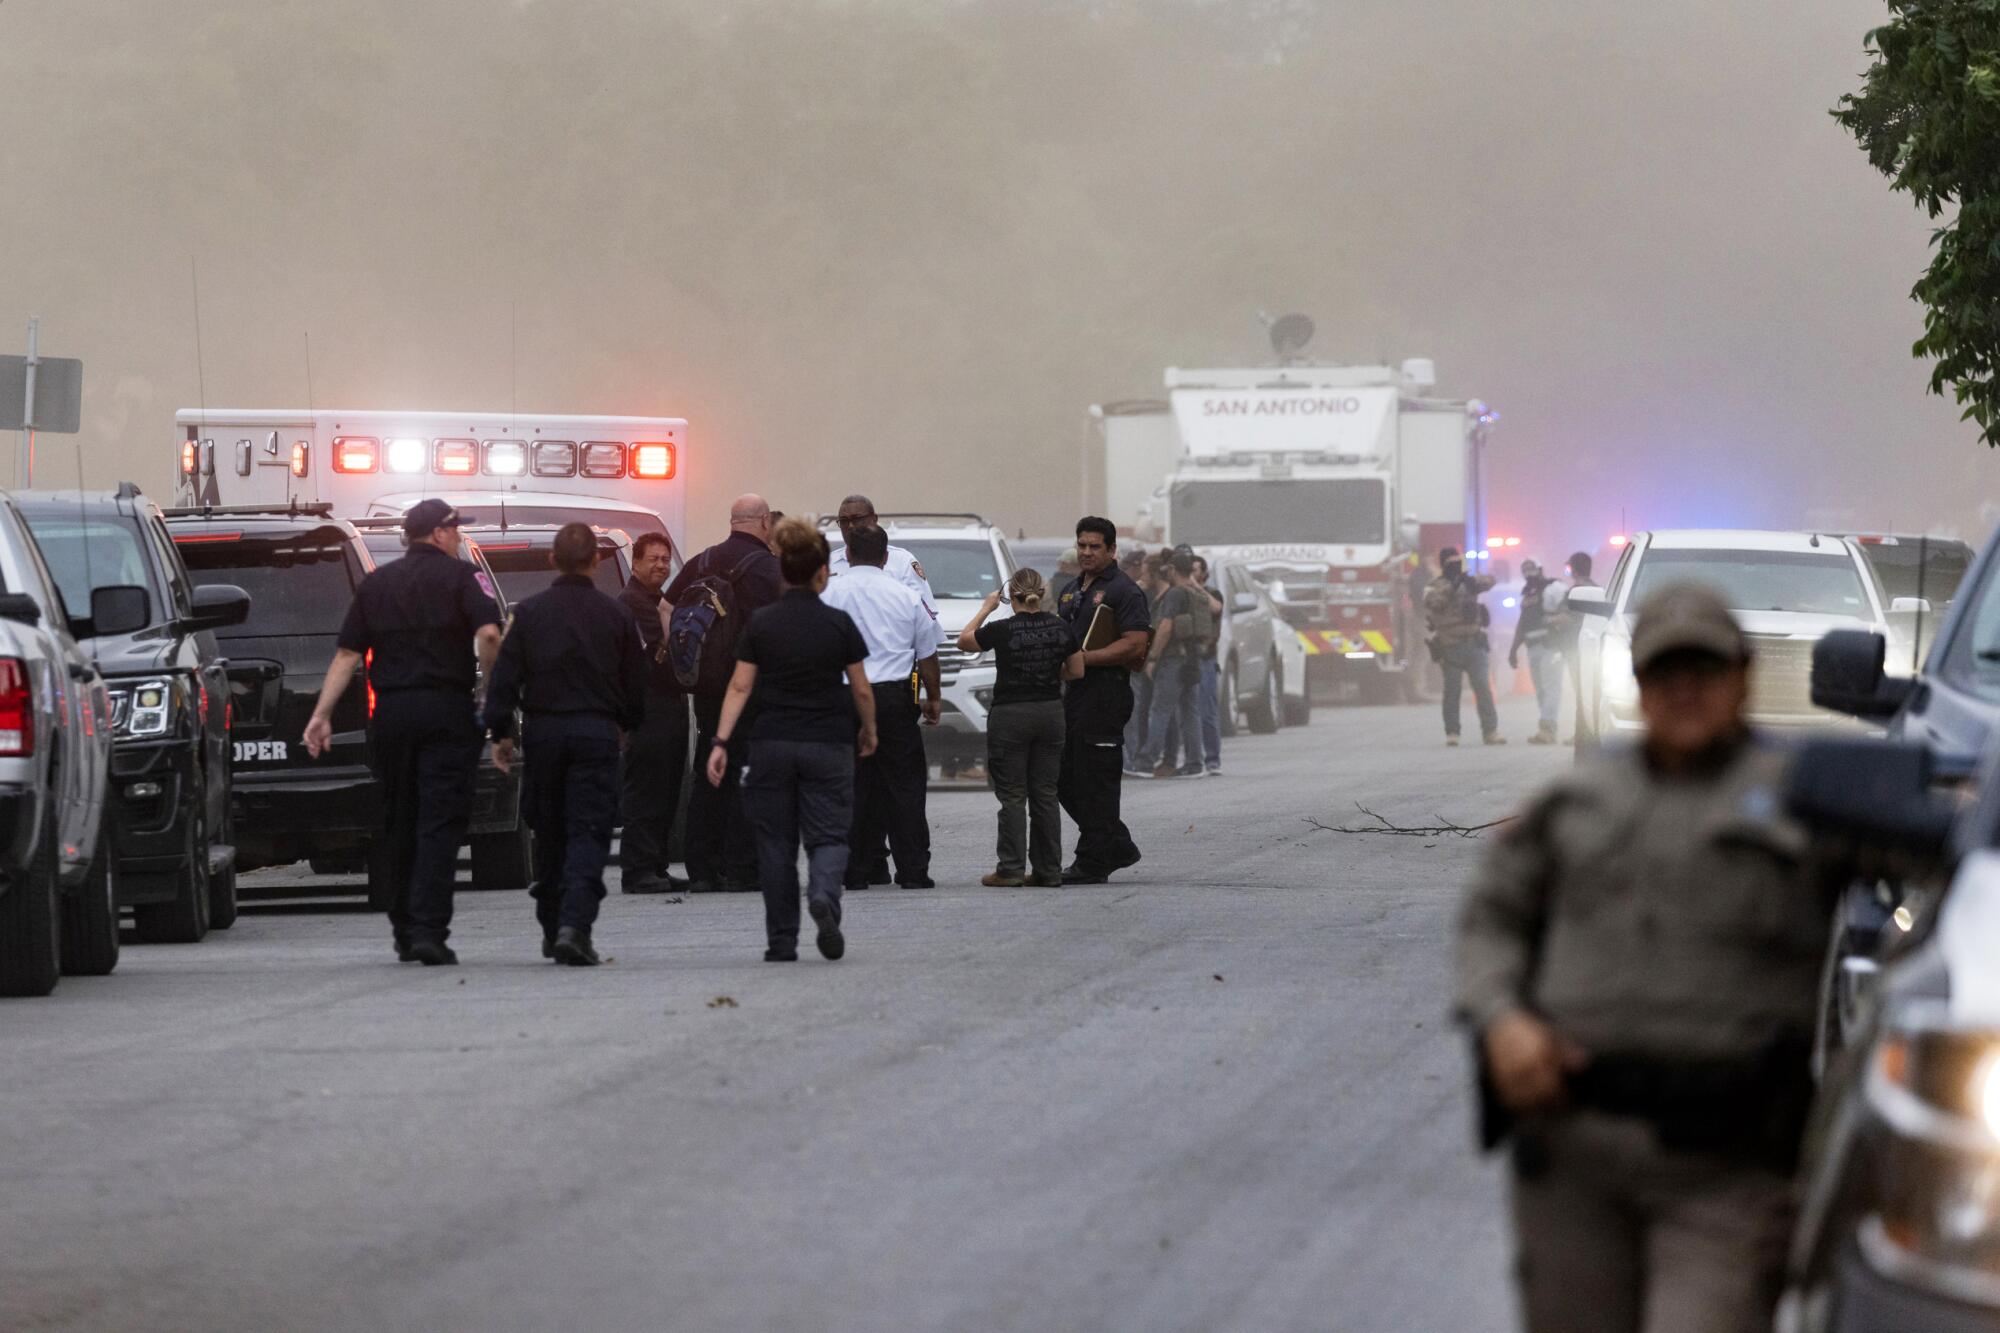 Law enforcement personnel are seen near long lines of emergency vehicles against a cloudy background